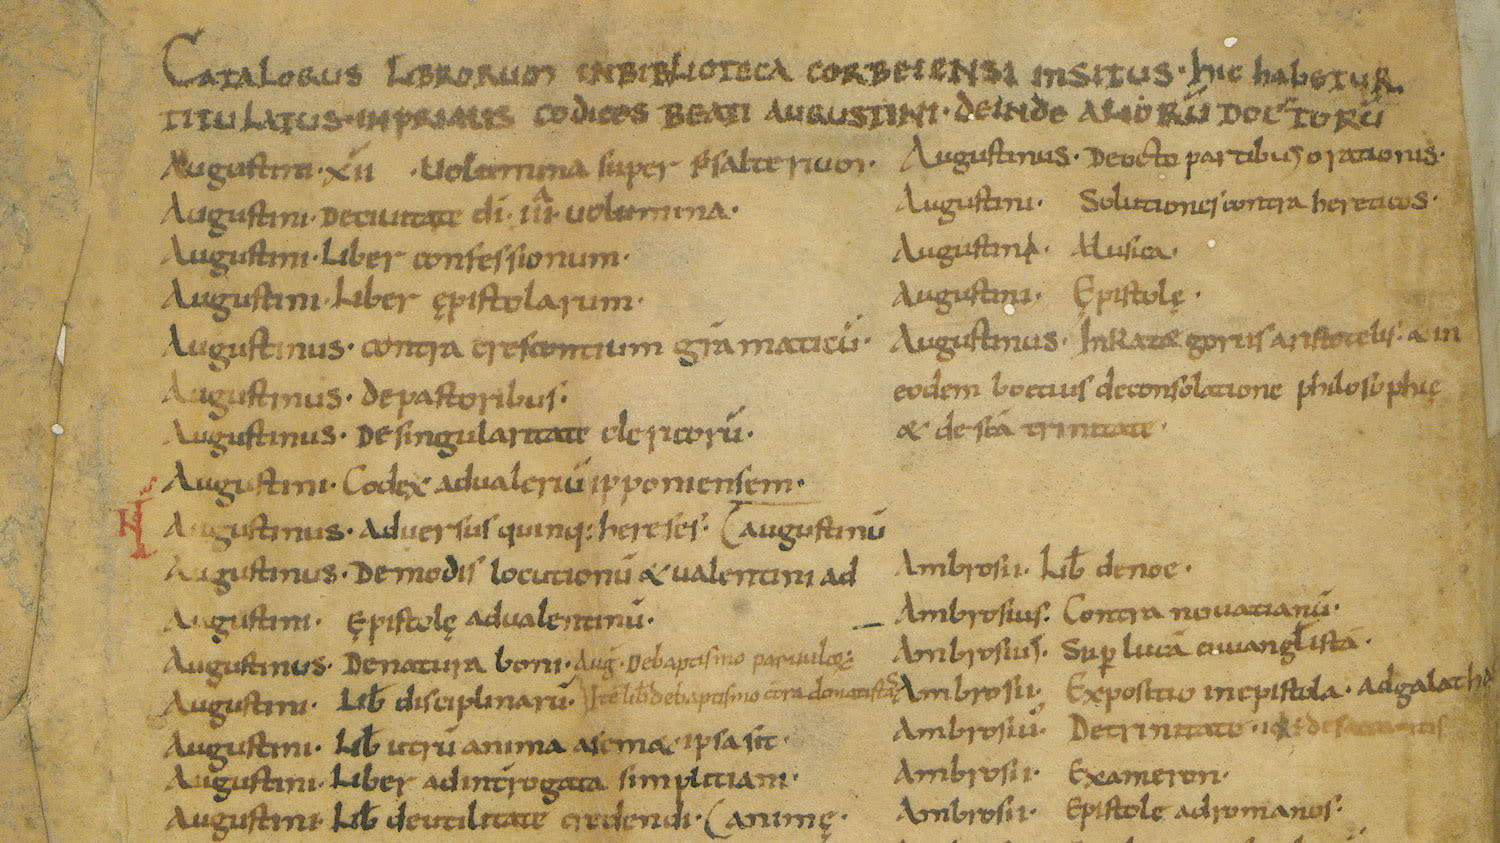 First page of book inventory with text in Latin